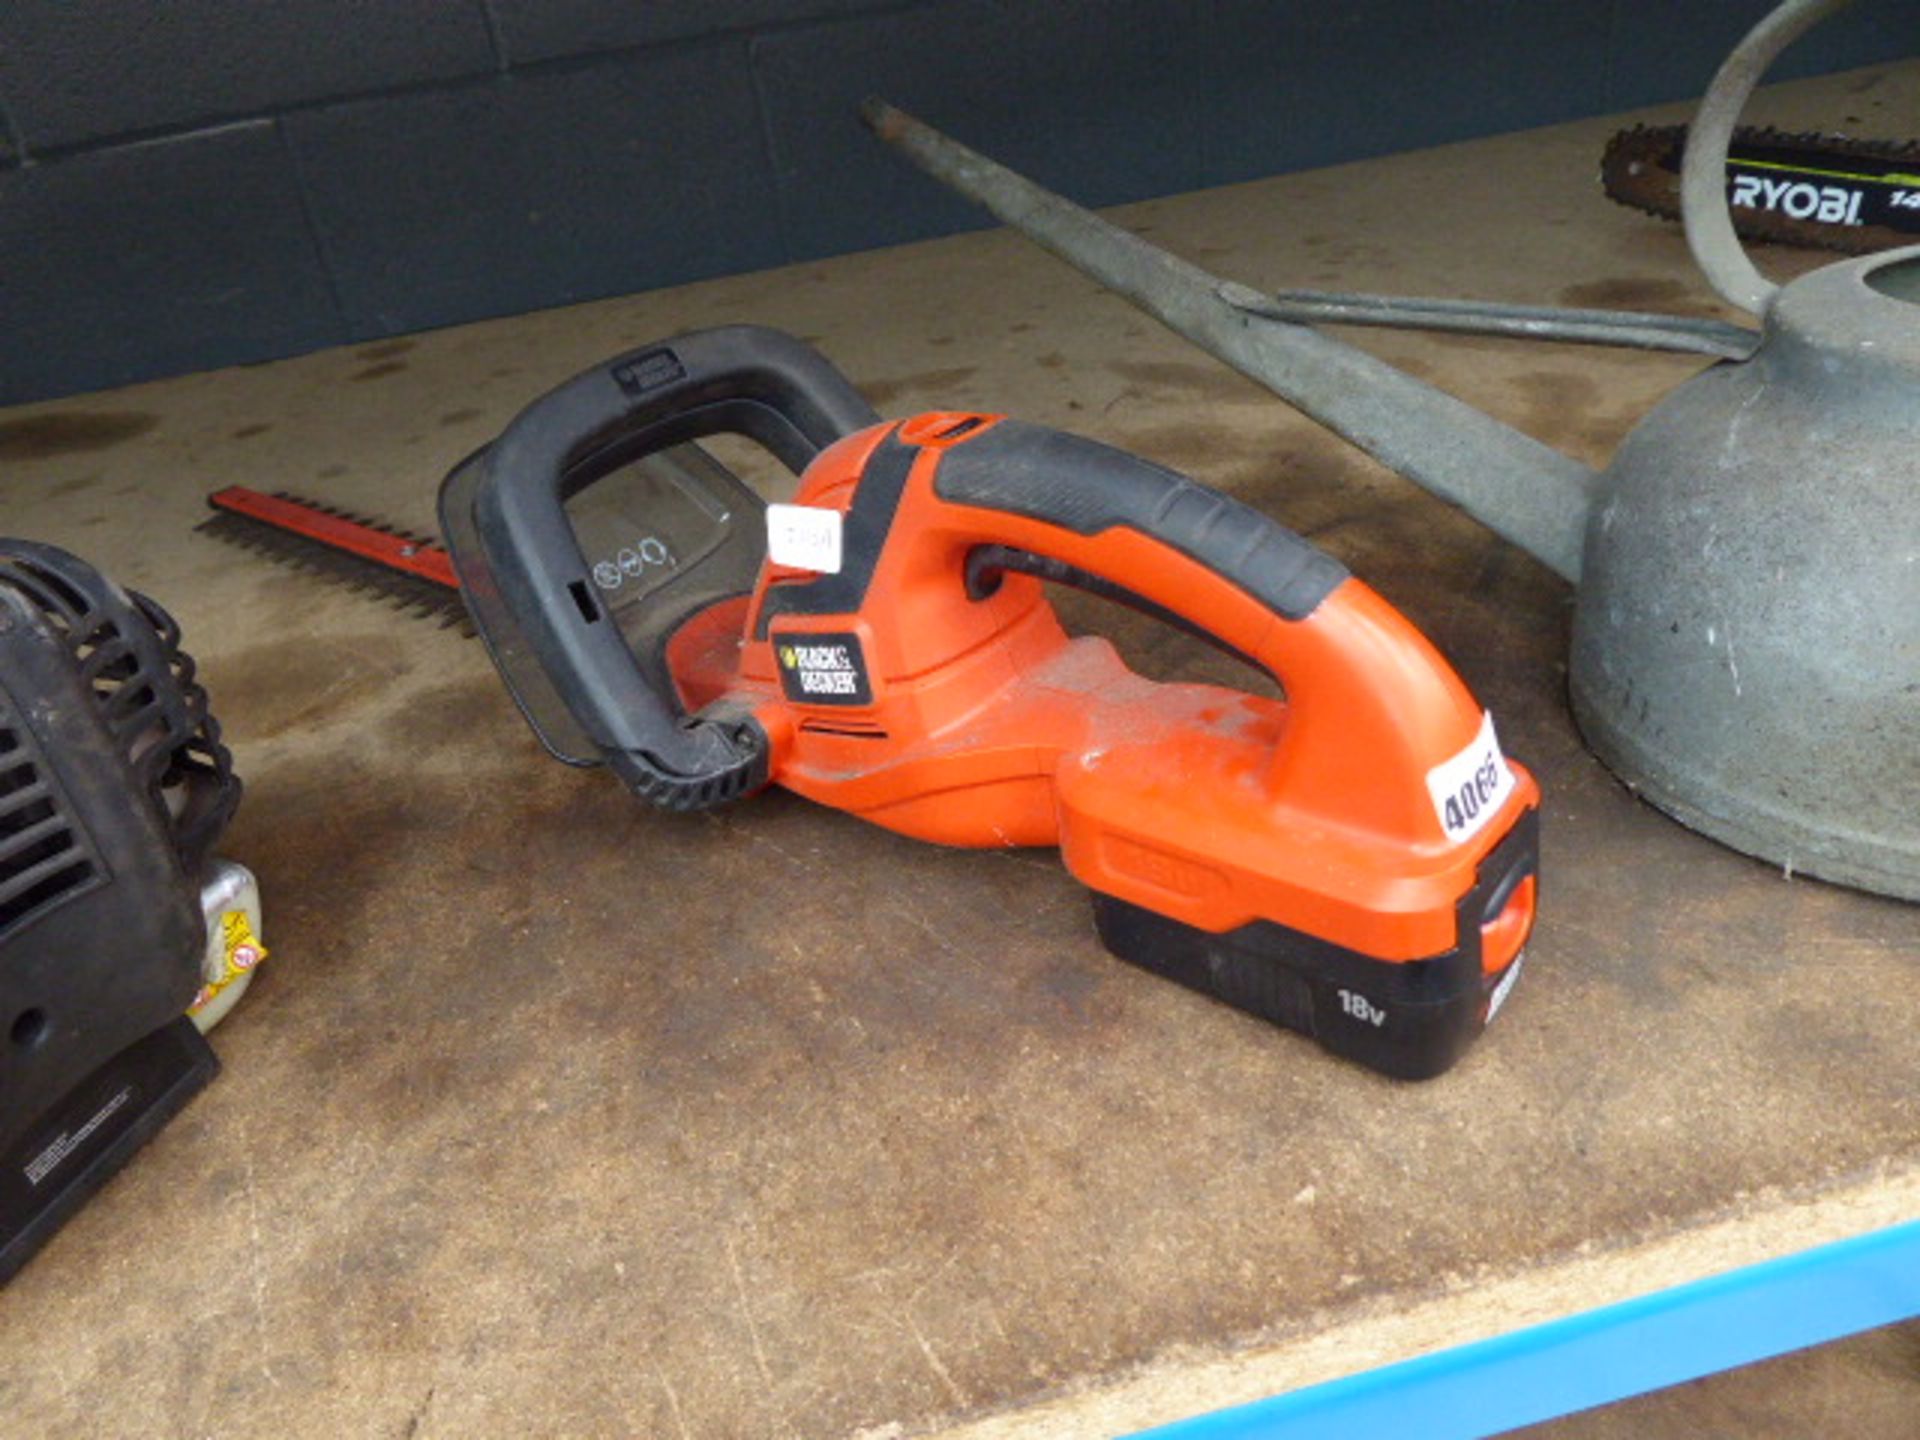 4061 - Black & Decker battery powered hedge cutter with one battery (no charger)